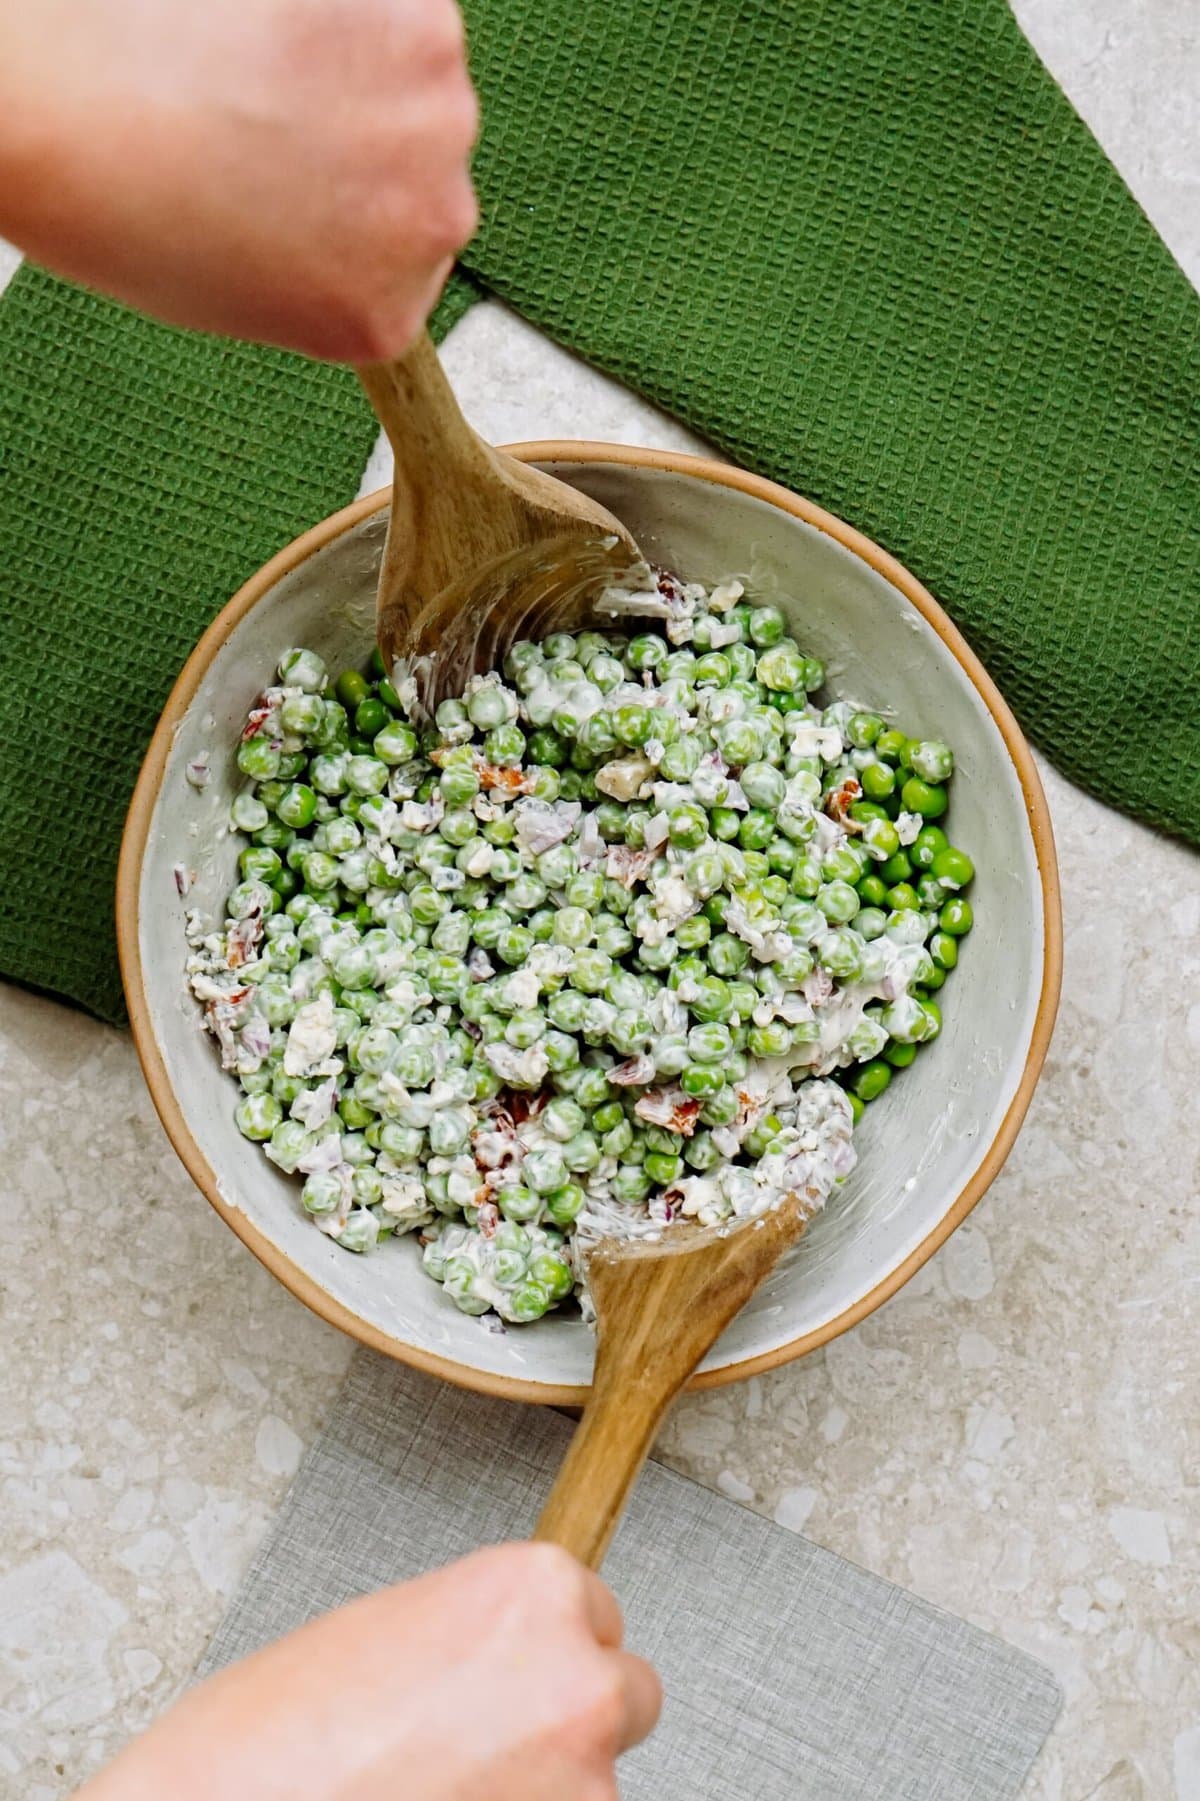 Hands mixing a pea salad with wooden spoons in a bowl.